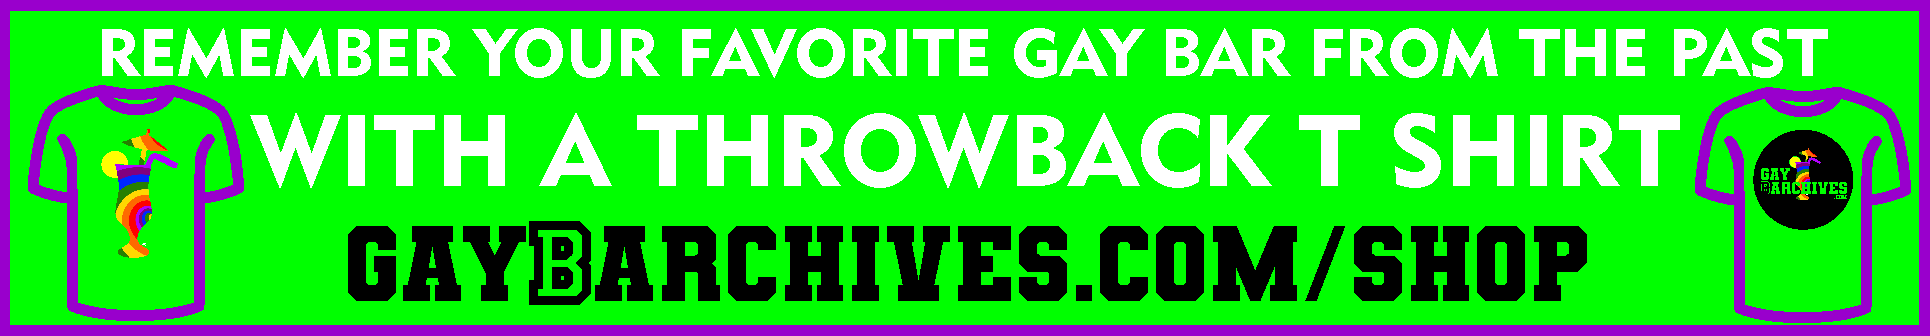 This link will take you to the archives page. There you can click on the state name to view that collection of designs. #TBTeez #ilovegaybars #promohomotv #lgbtqhistory #pride EXPLORING GAY HISTORY ONE BAR AT A TIME! GayBarchives = Gay + Bar + Archives